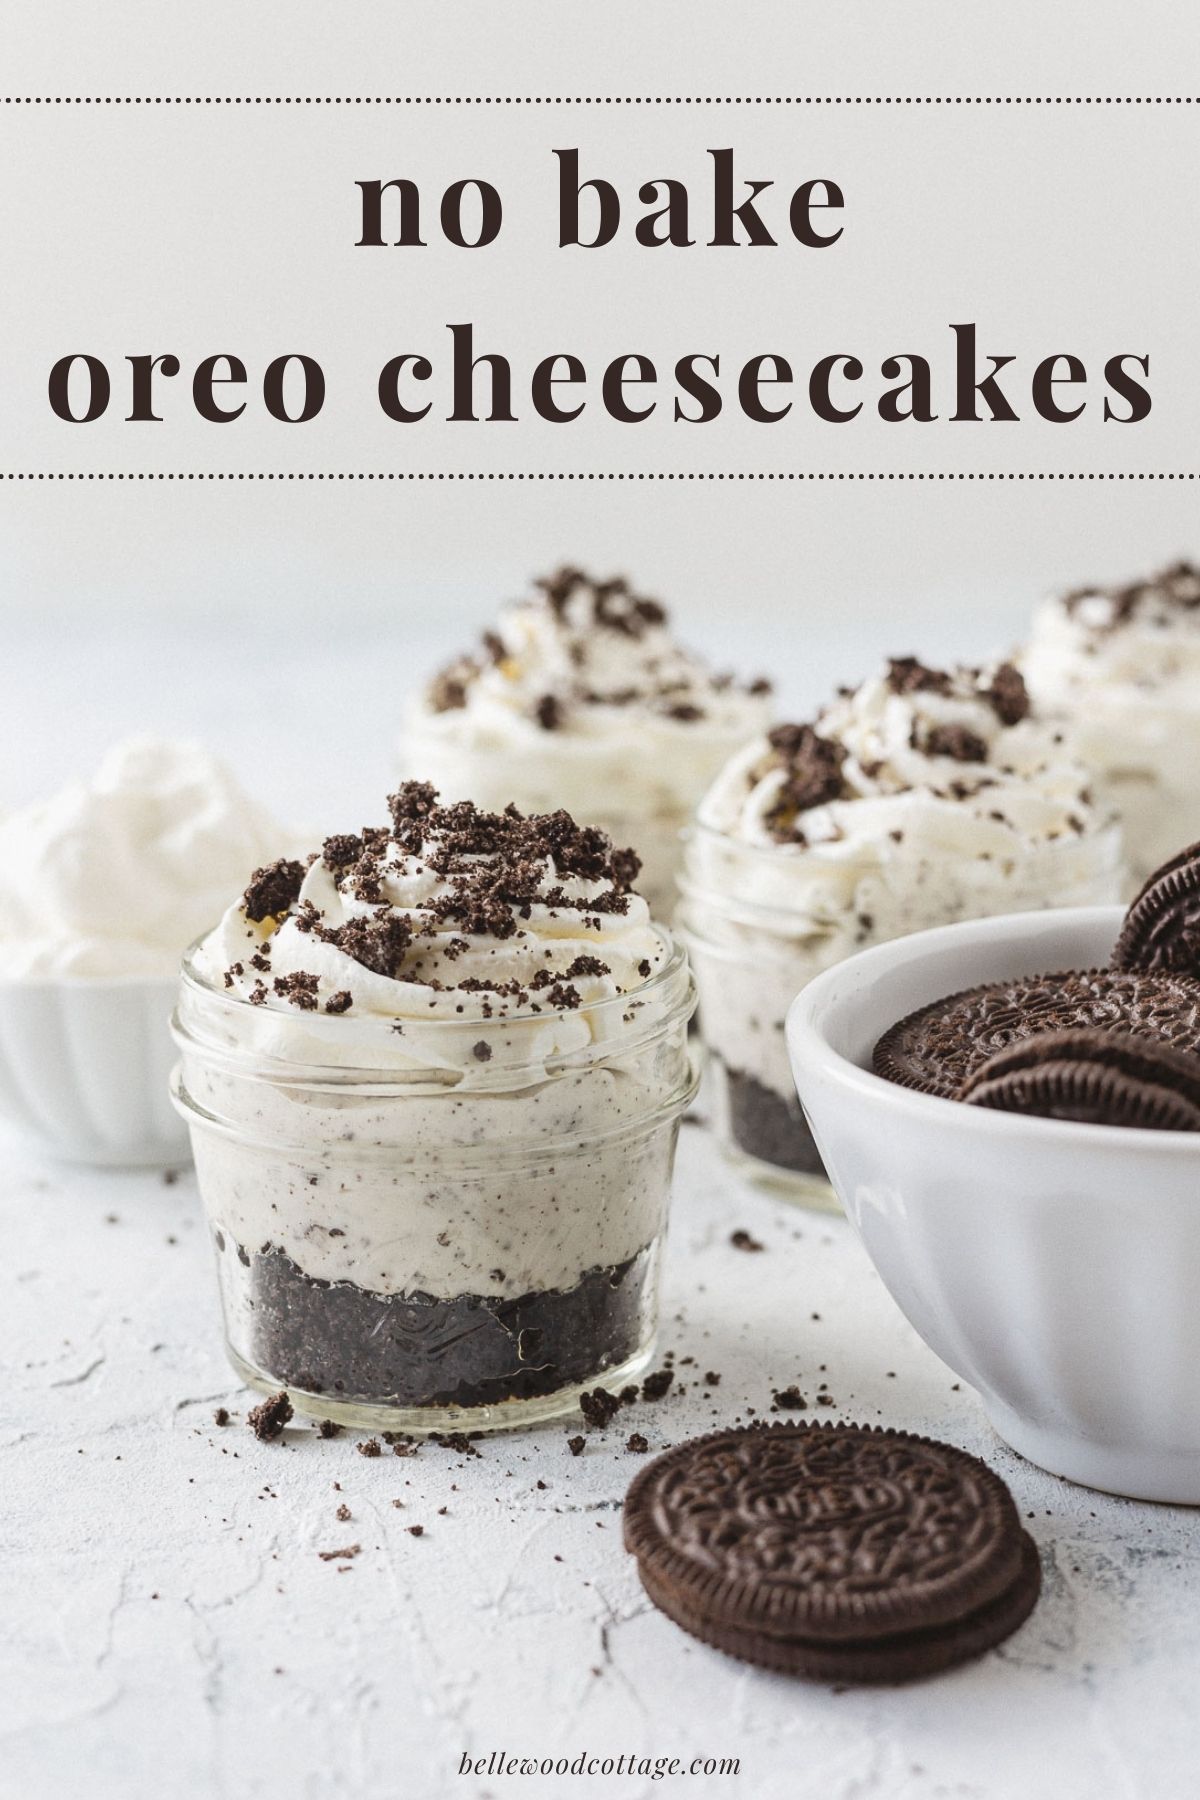 A cookies and cream cheesecake in a jar and chocolate sandwich cookies with the words, "no bake oreo cheesecake".